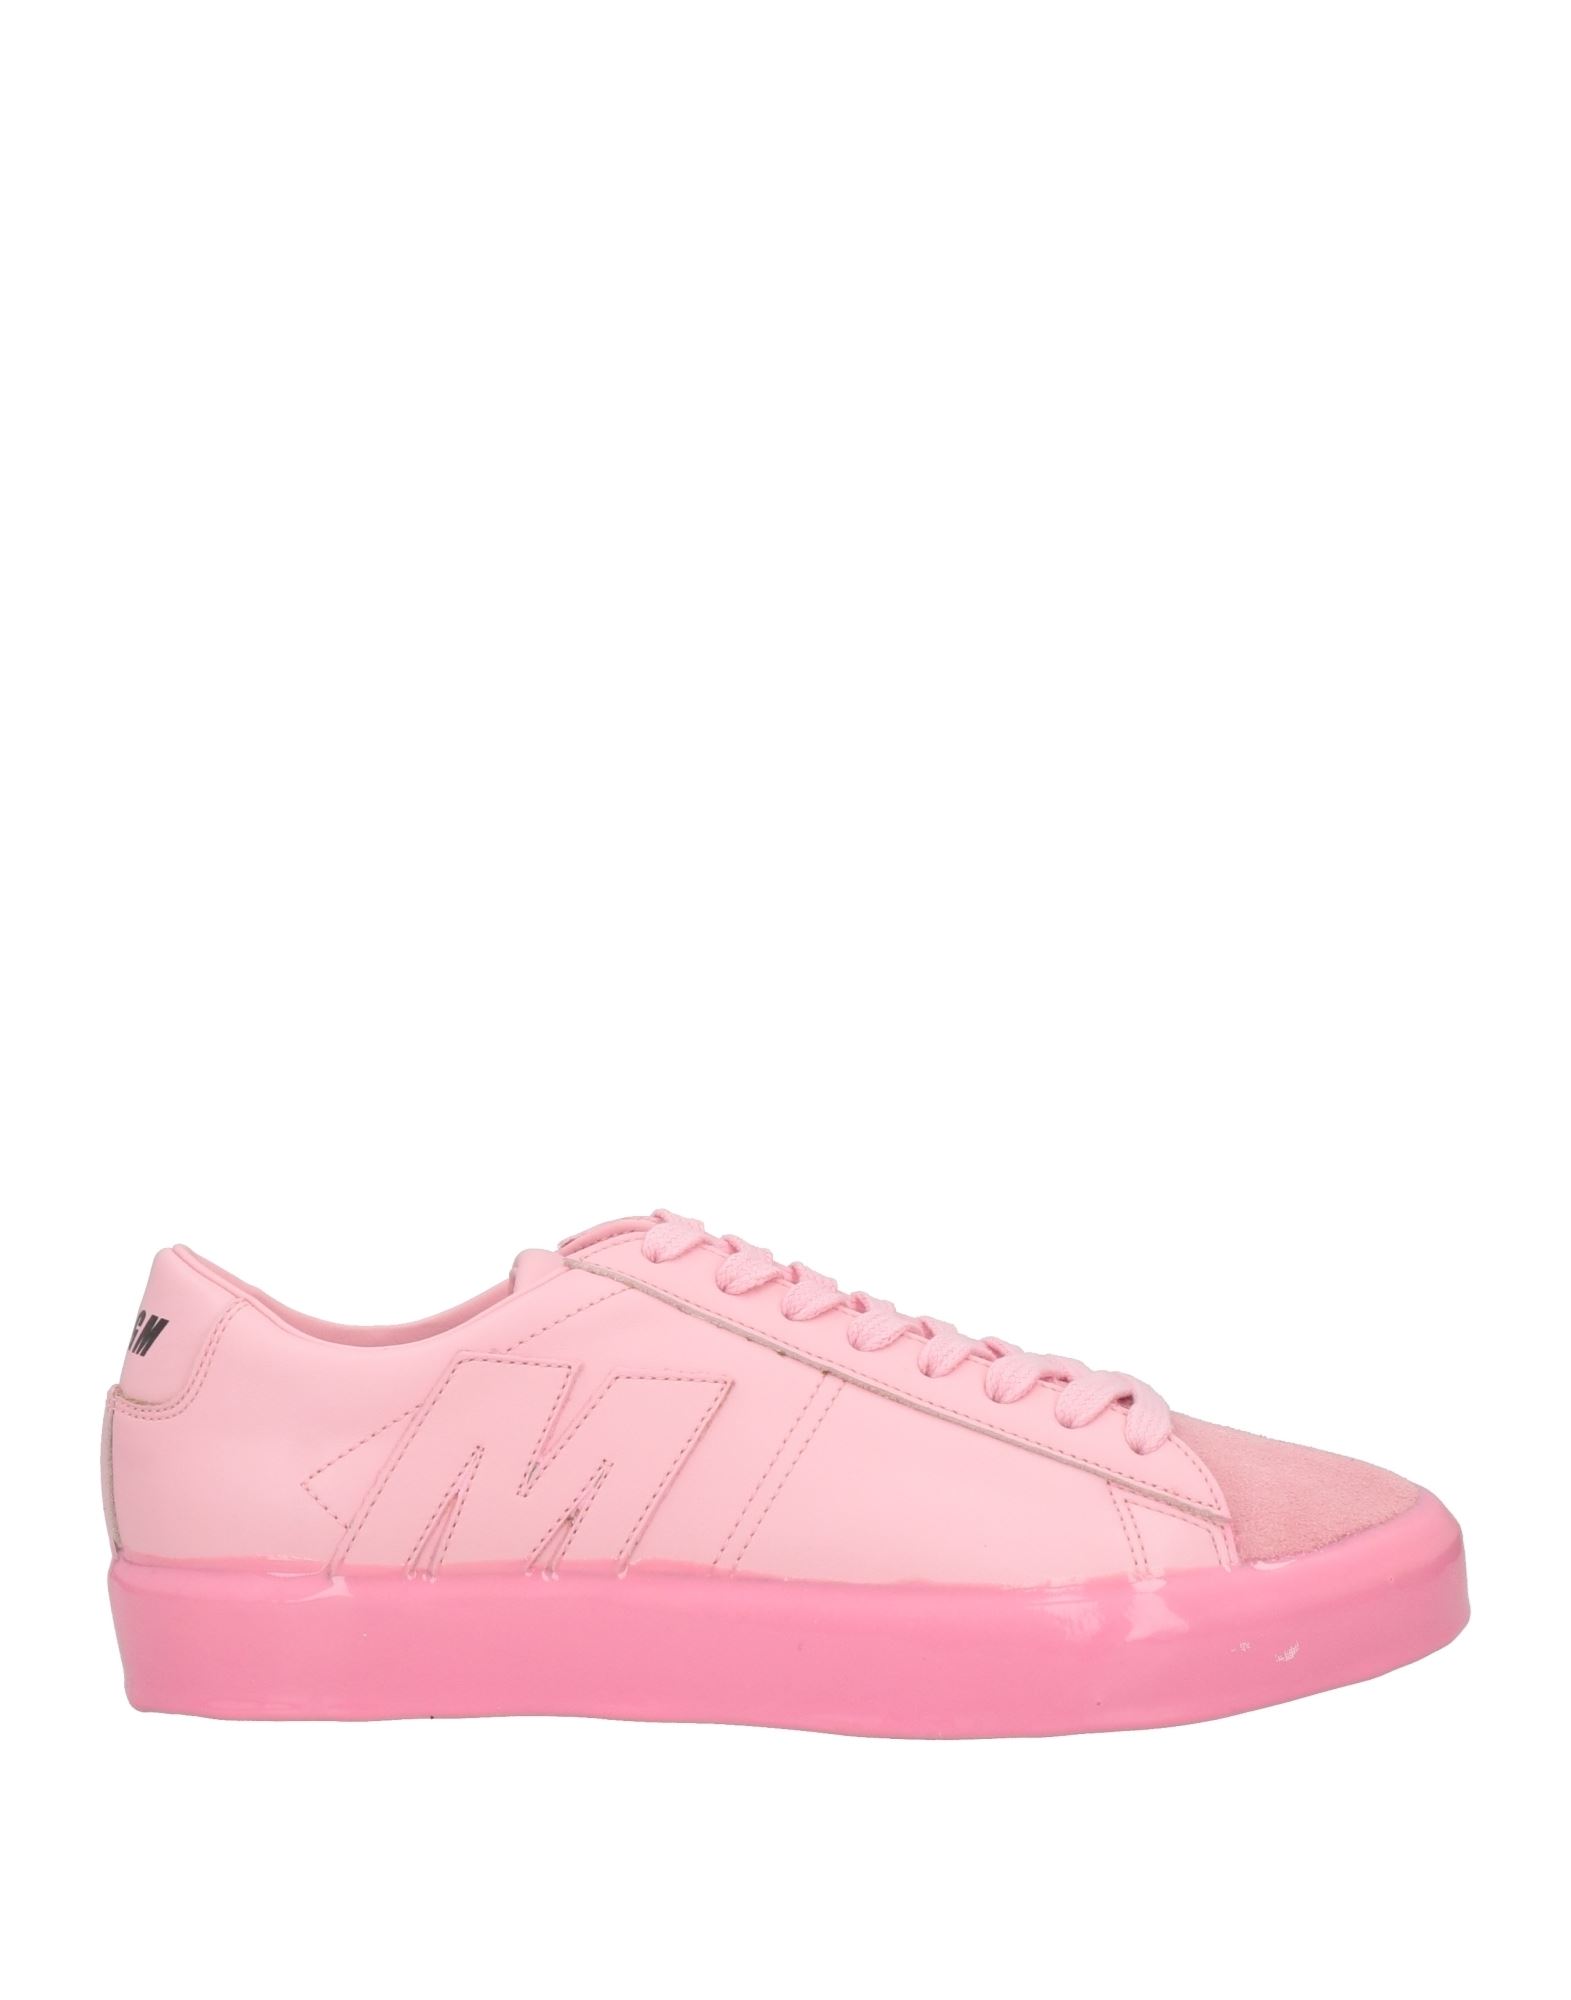 Msgm Sneakers In Pink